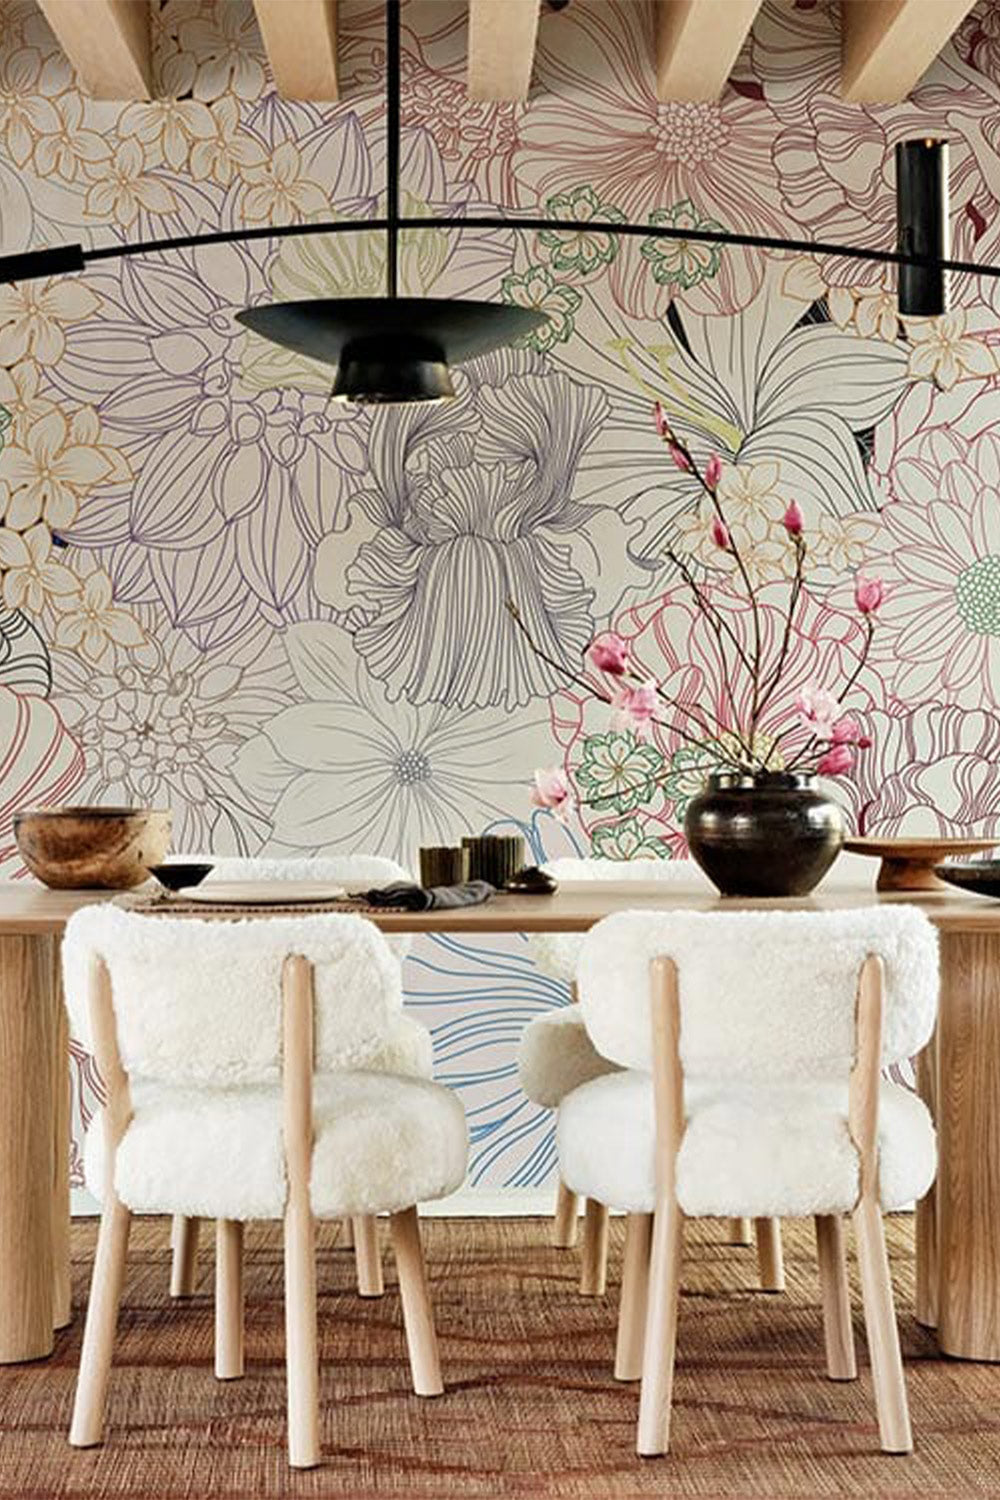 Dining room wallpaper ideas 11 ways to decorate for drama 